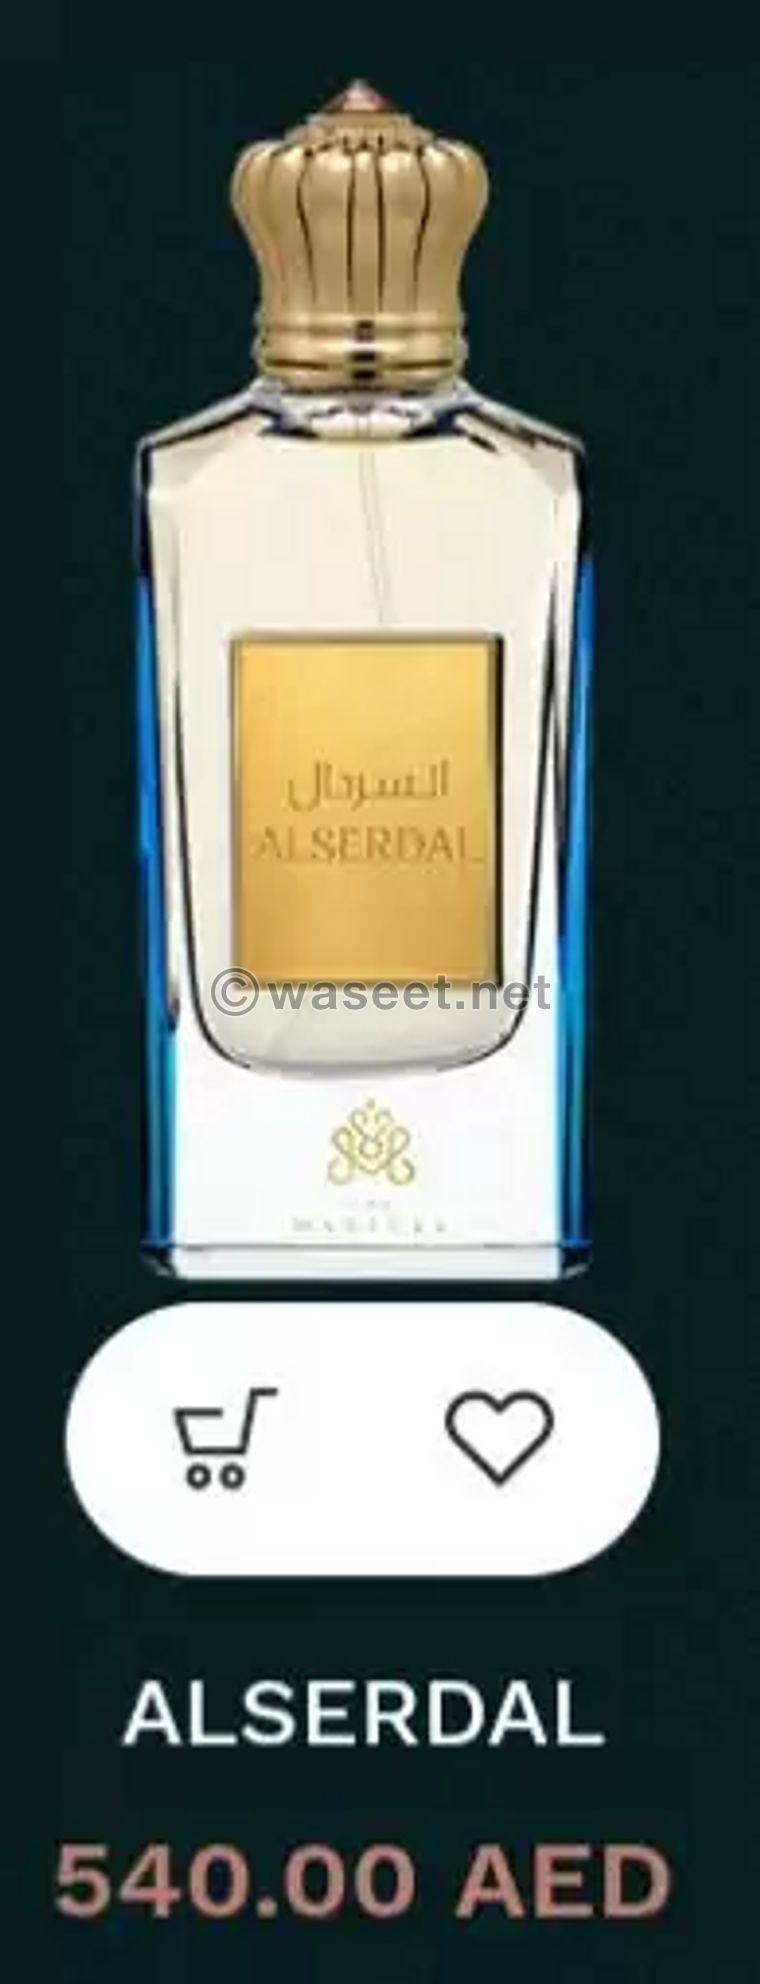 Luxury perfumes from The Masters 0